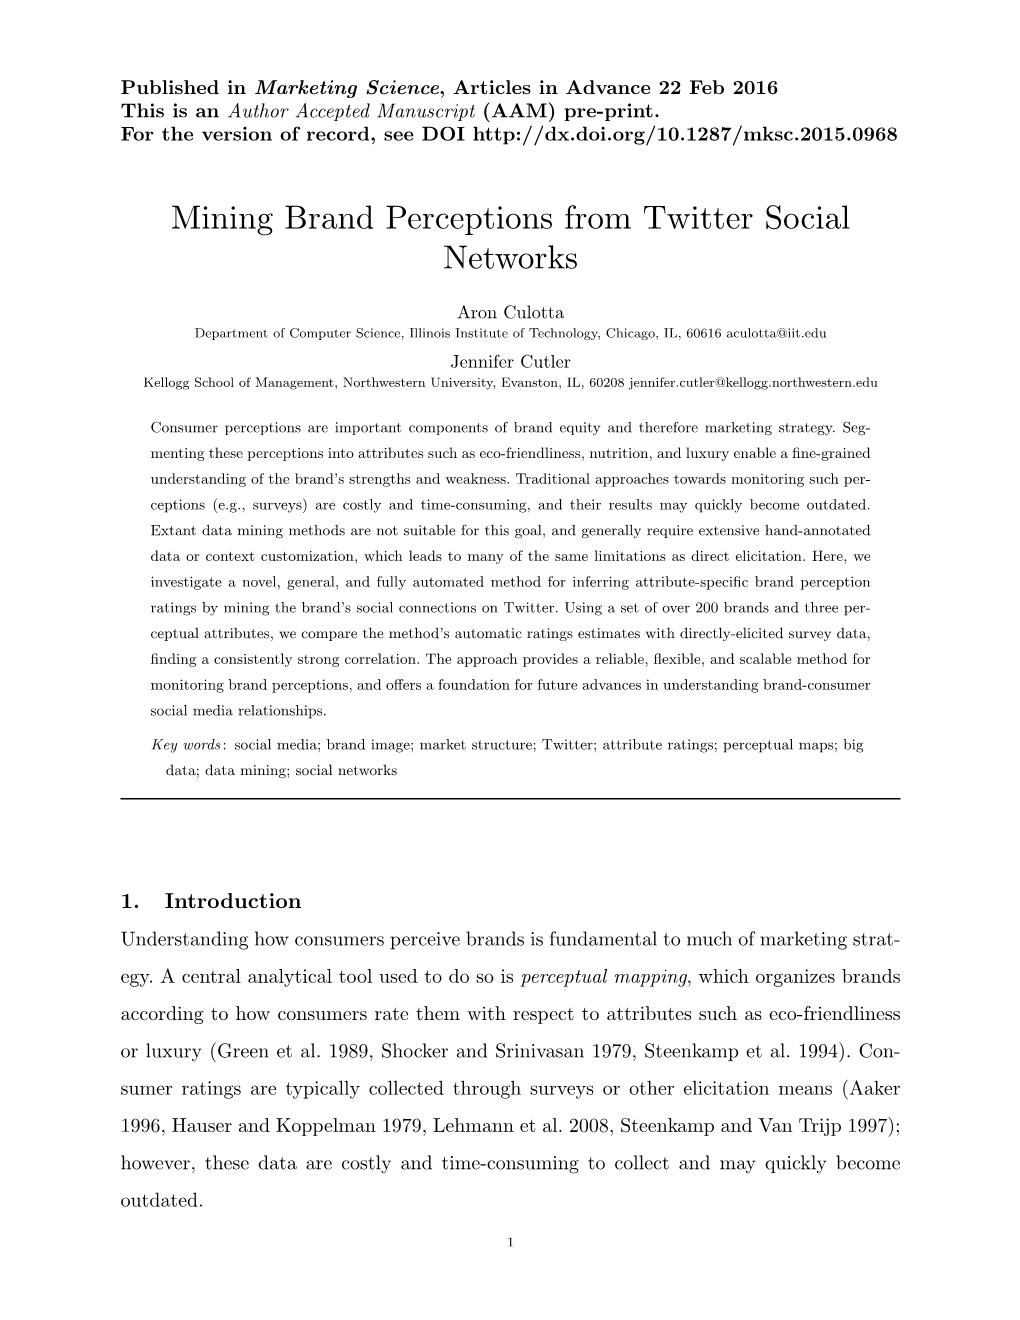 Mining Brand Perceptions from Twitter Social Networks